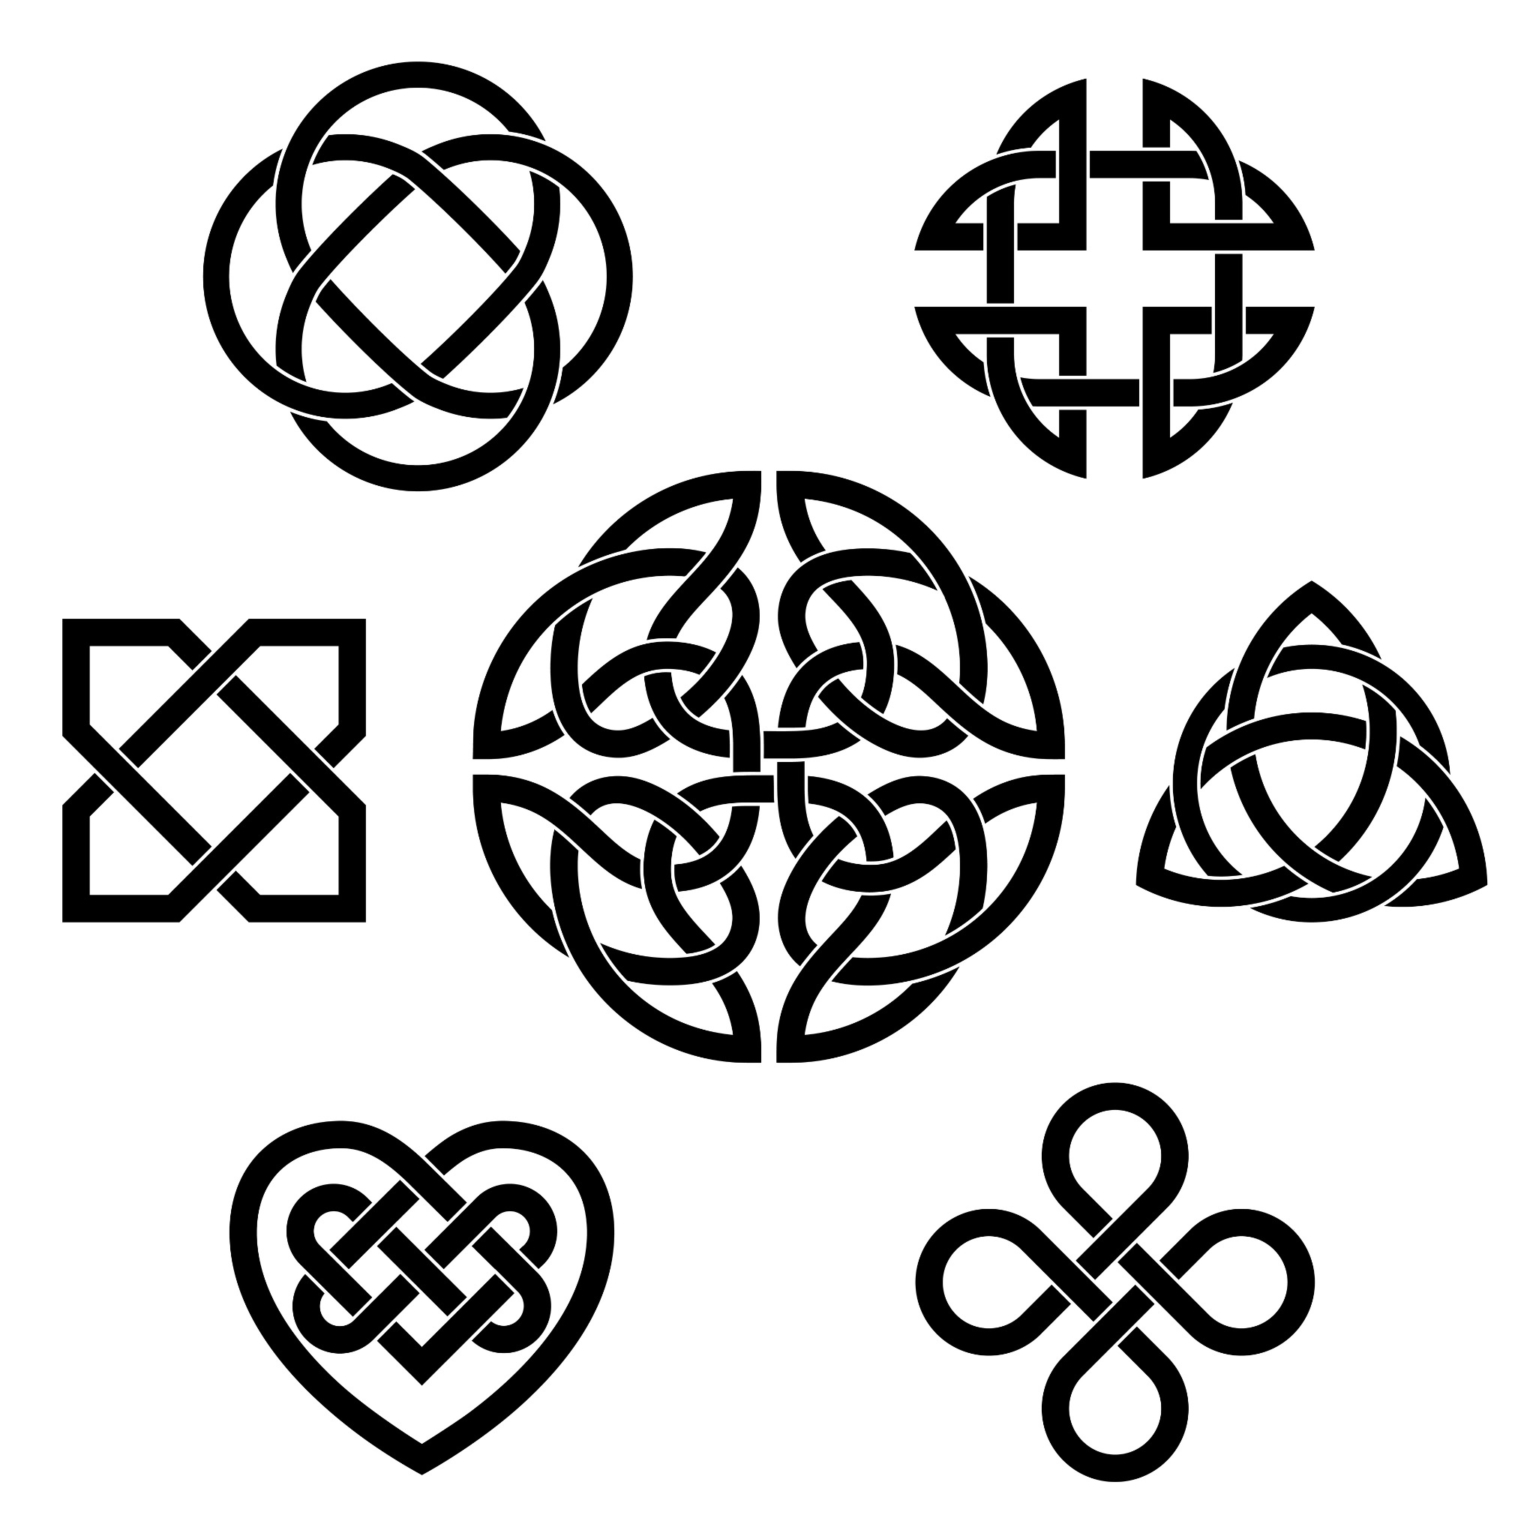 Learn More About the Celtic Knot Meaning | Kilts-n-Stuff.com